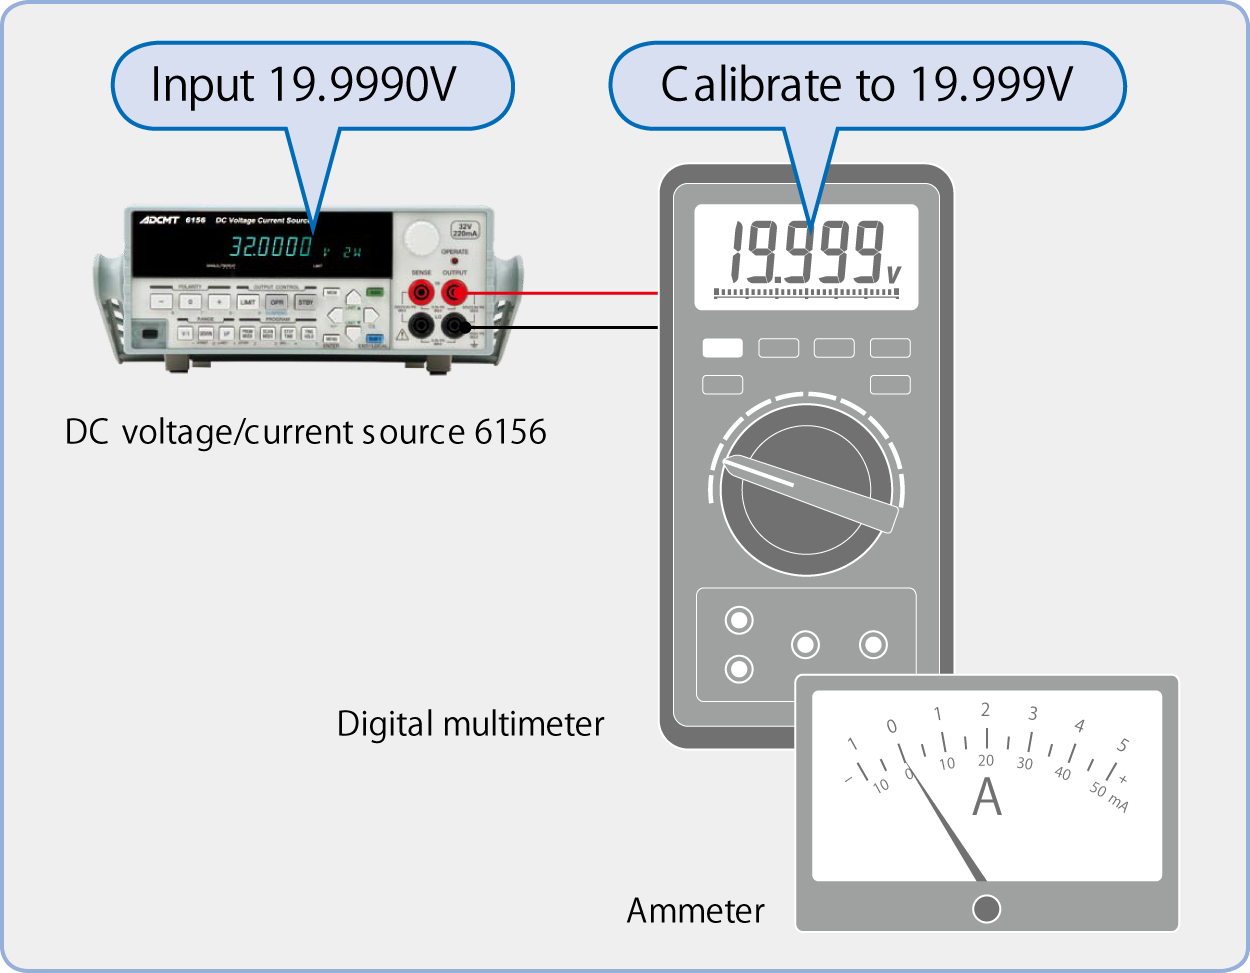 6146/6156 For Calibration of Meters and Measuring Instruments